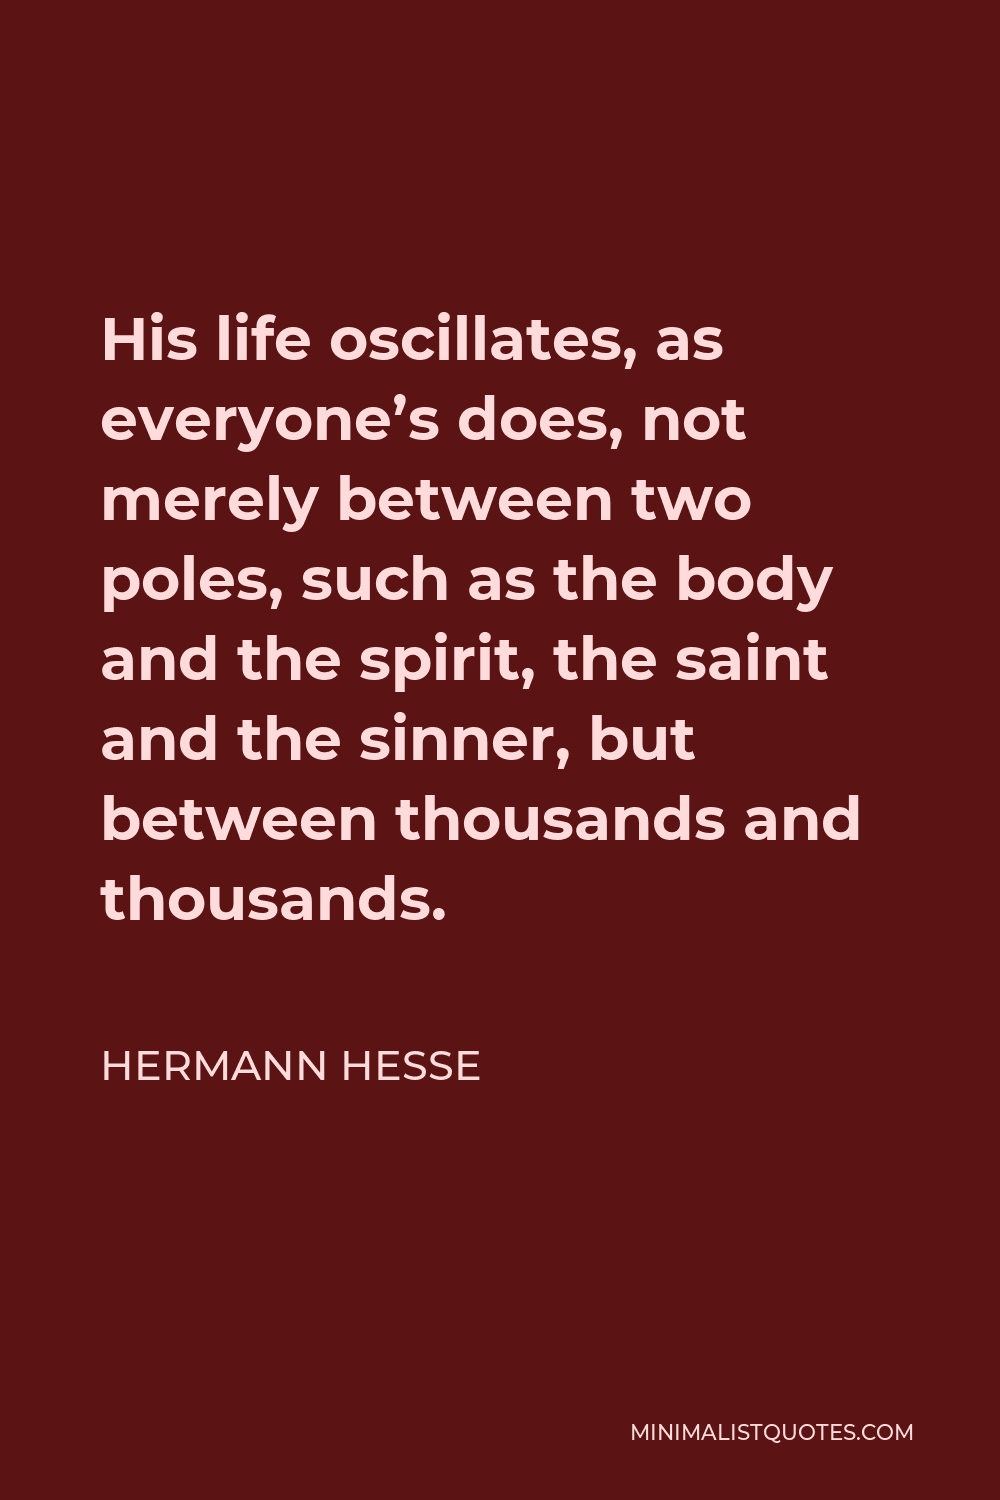 Hermann Hesse Quote - His life oscillates, as everyone’s does, not merely between two poles, such as the body and the spirit, the saint and the sinner, but between thousands and thousands.